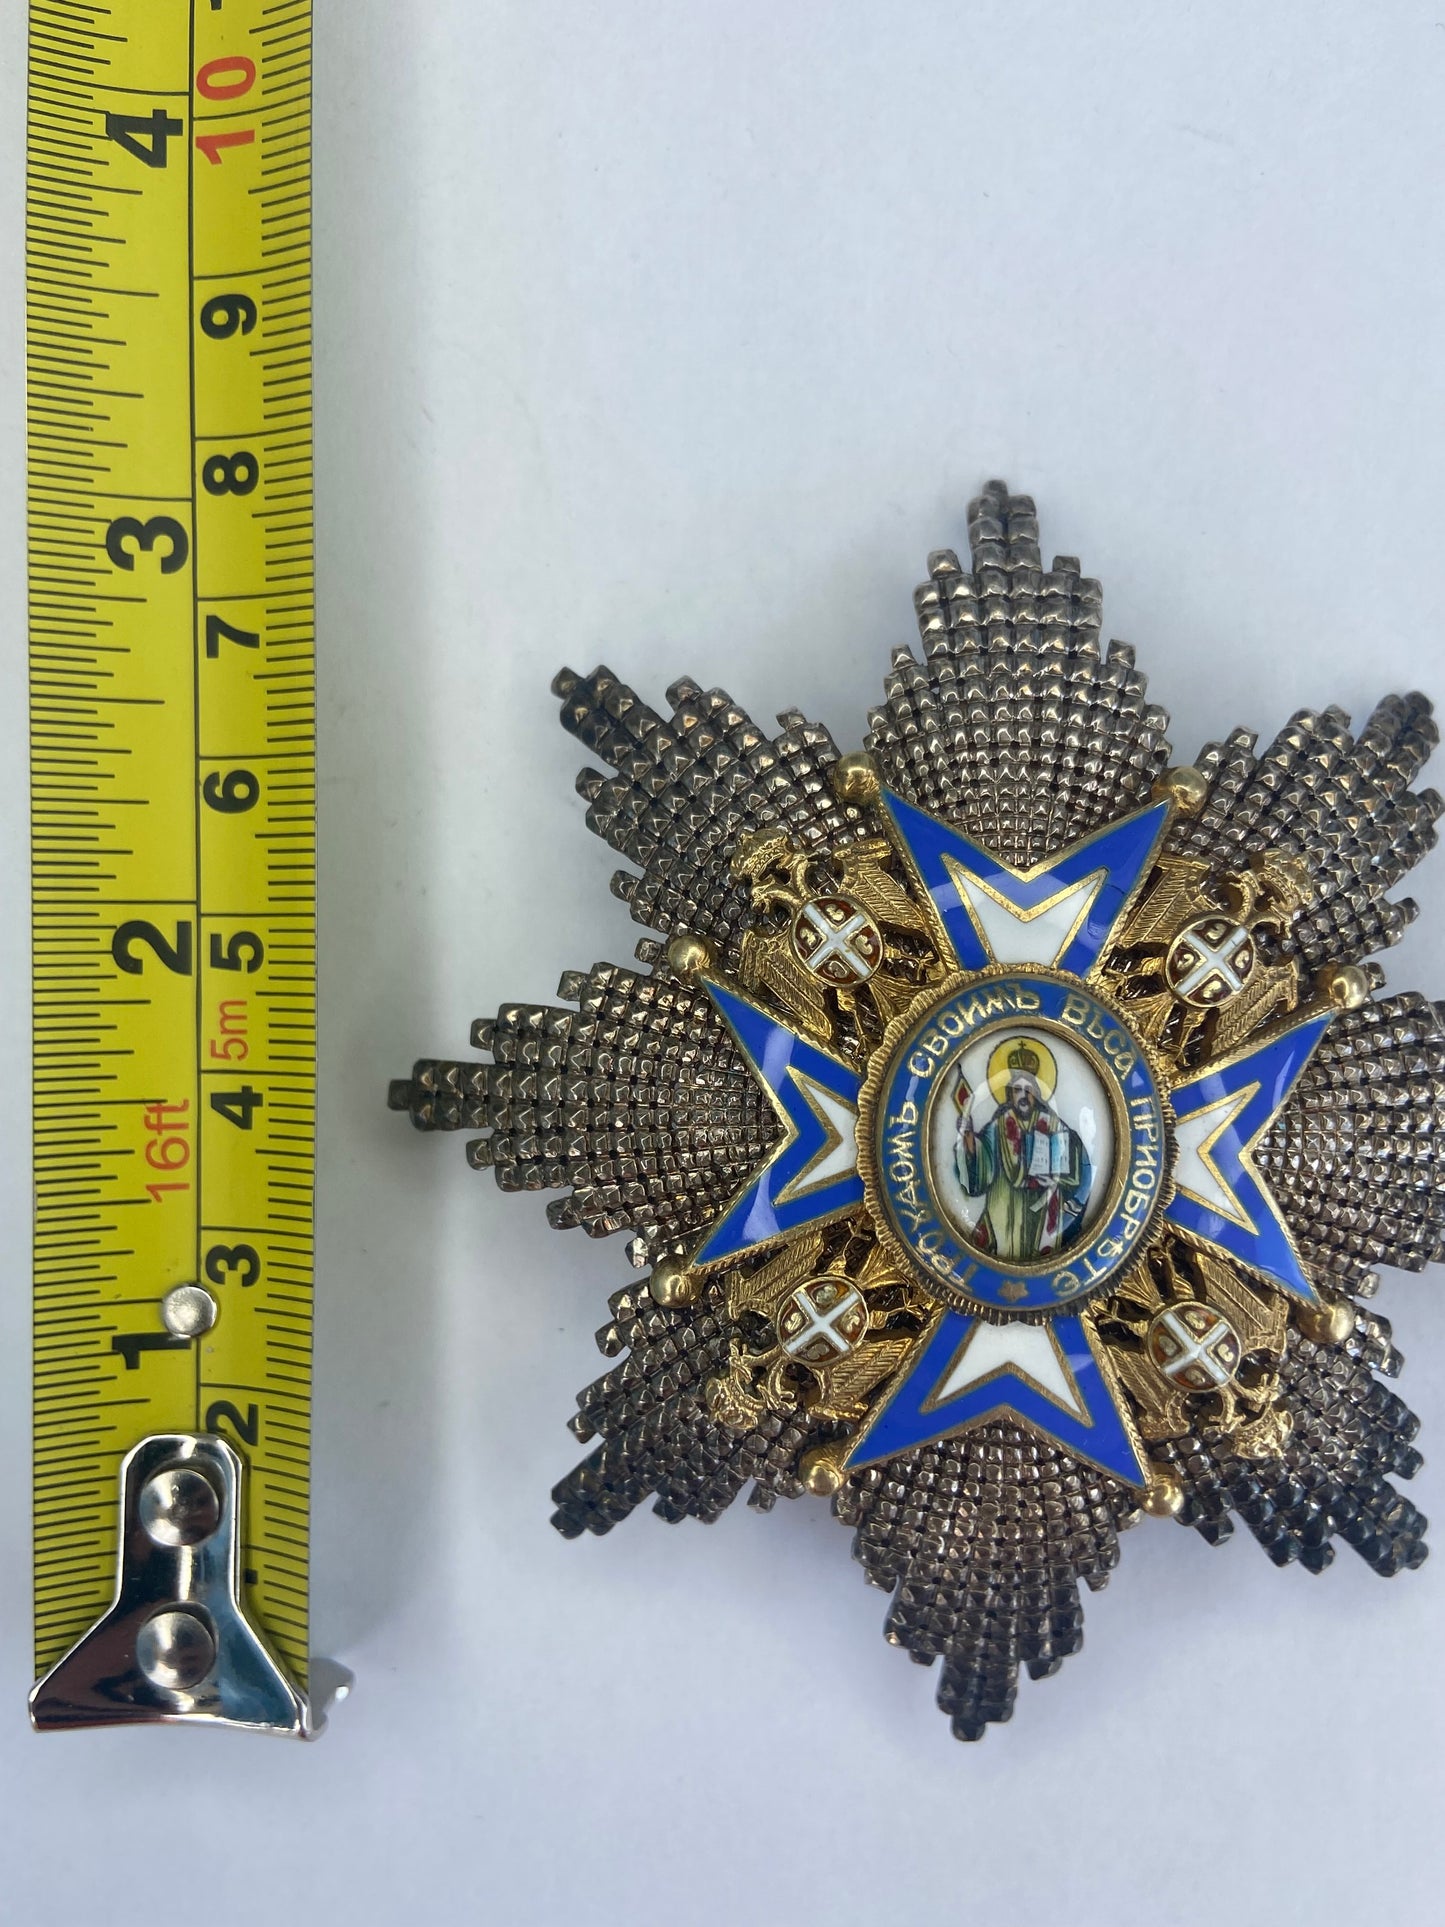 SERBIA ORDER OF SAINT SAVA GRADE OFFICER GRADE NECK BADGE AND BREAST STAR. TYPE 3. BOXED.